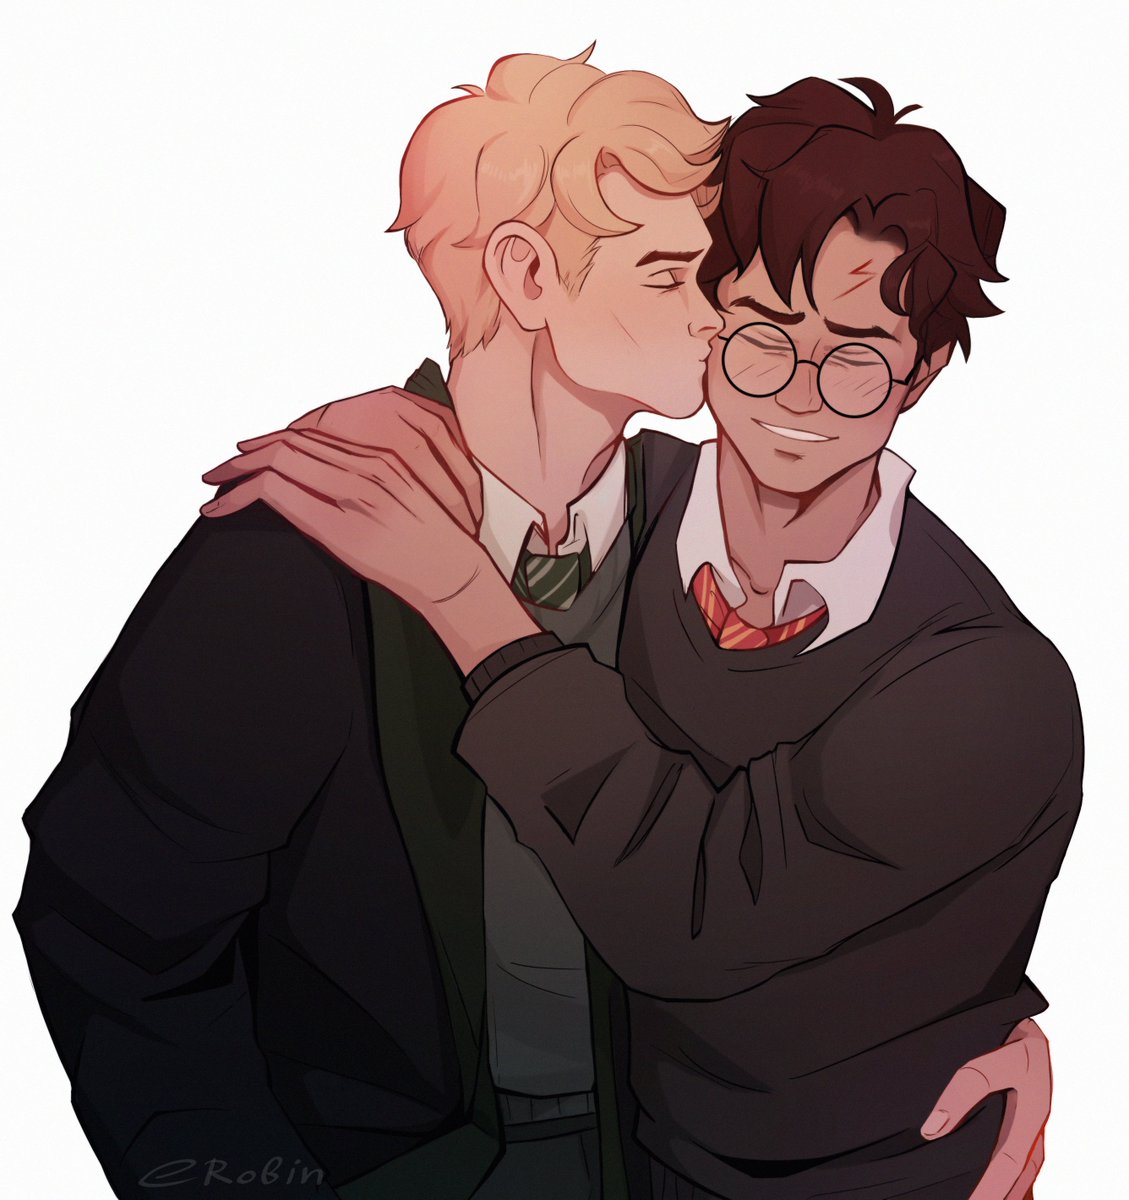 Harry and Draco, C2 #harrypotter #drarry.